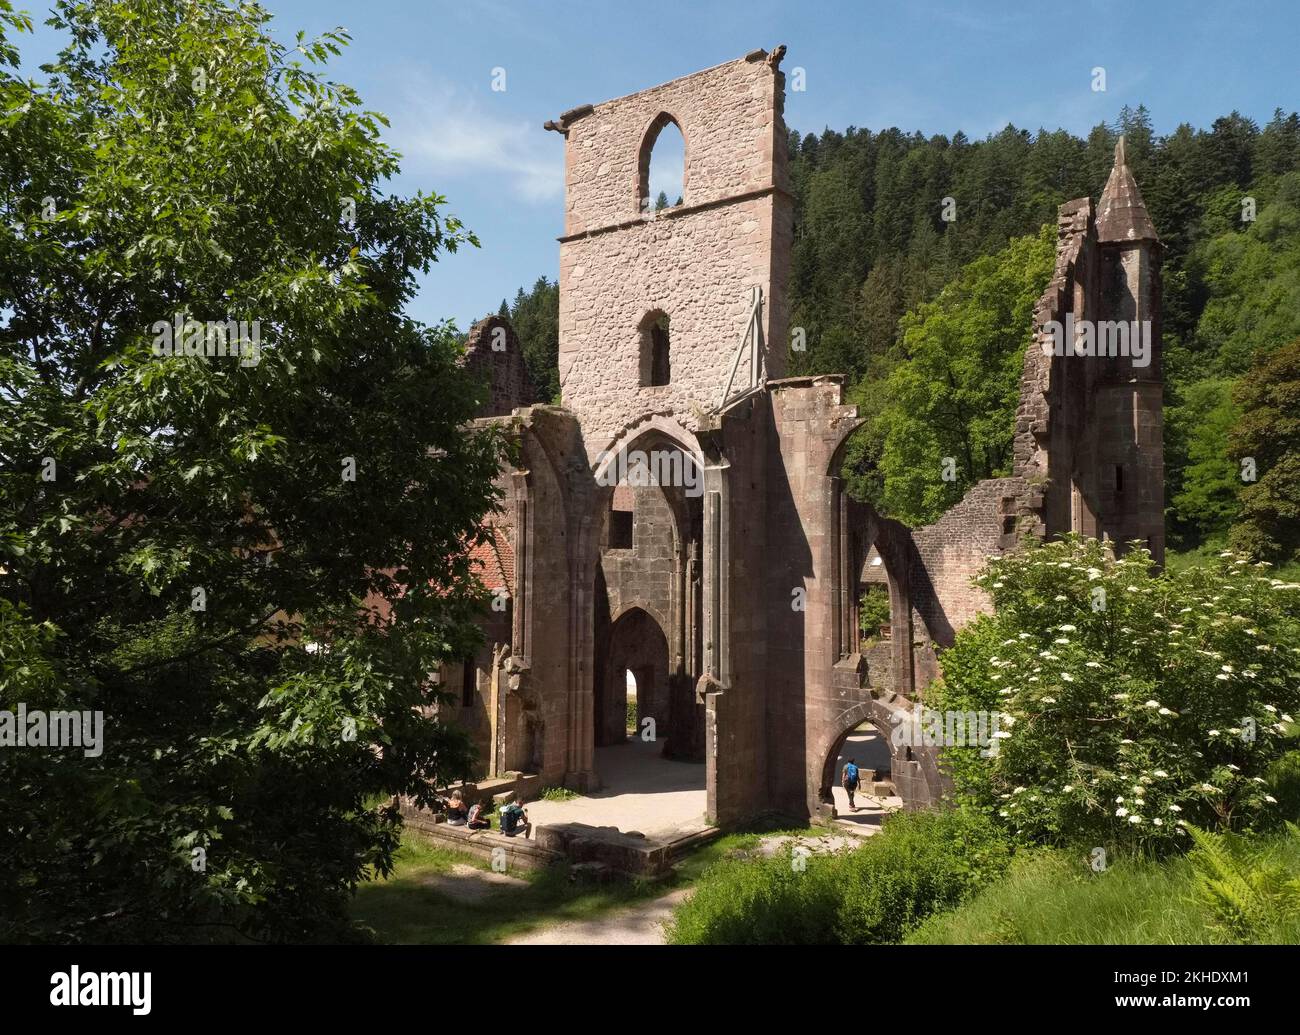 All Saints Monastery Ruins in the Black Forest National Park, Upper Renchtal, All Saints Monastery, Oppenau, Baden-Württemberg, Germany, Europe Stock Photo